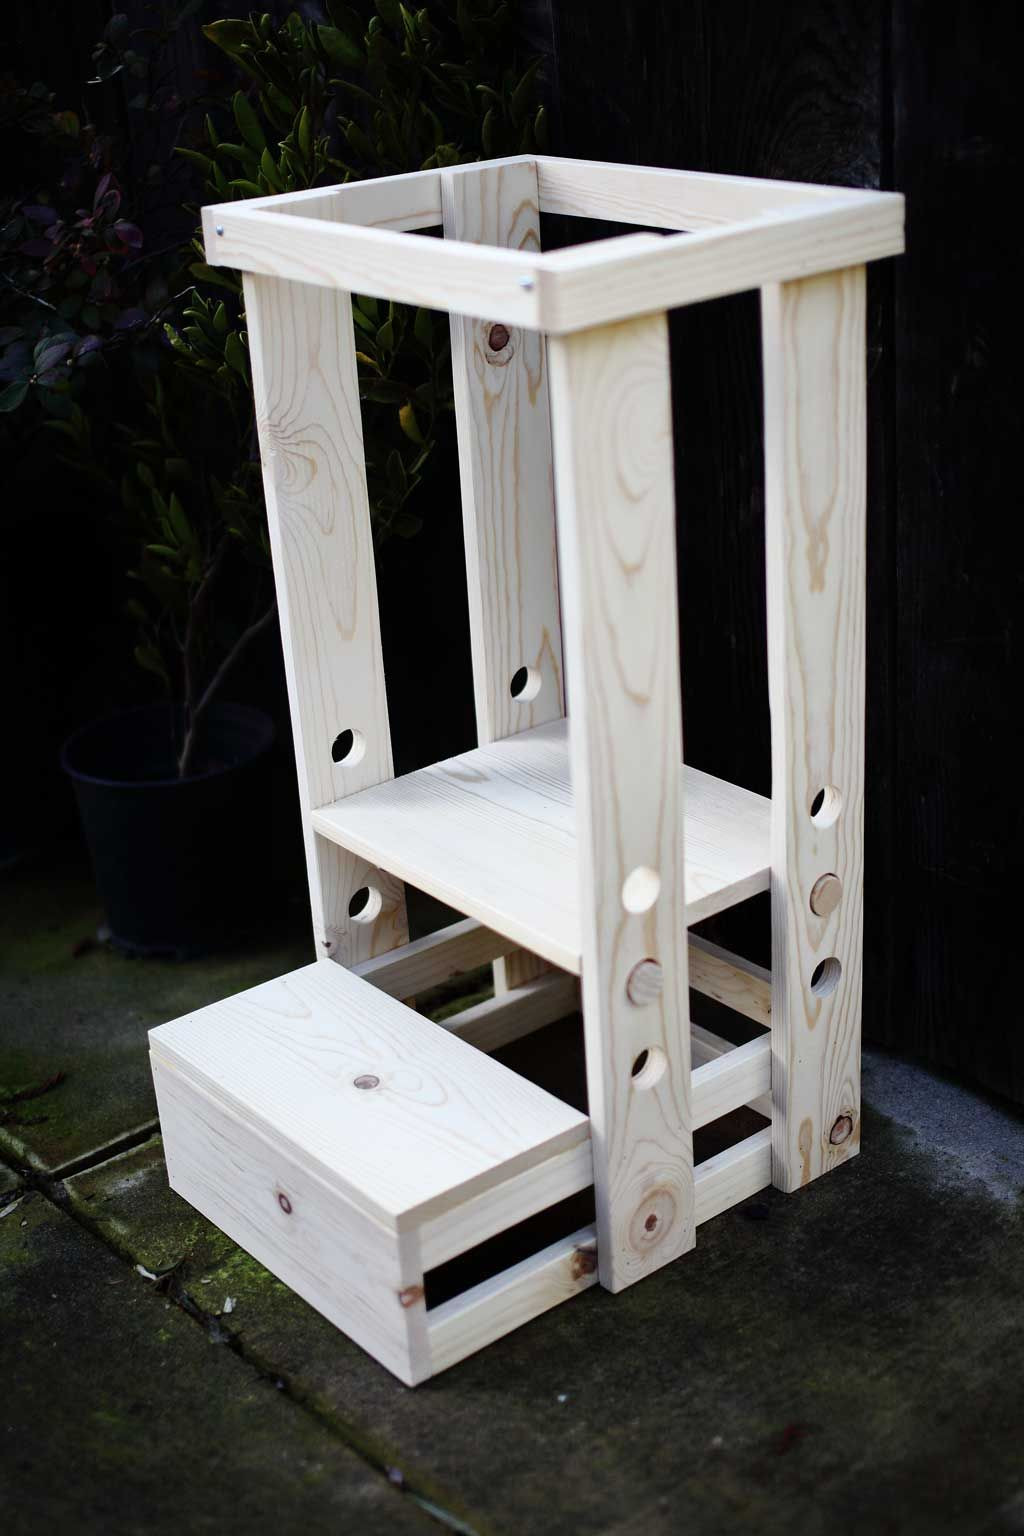 DIY Toddler Step Stool
 How to Build a DIY Toddler Step Stool with Guard Rail in